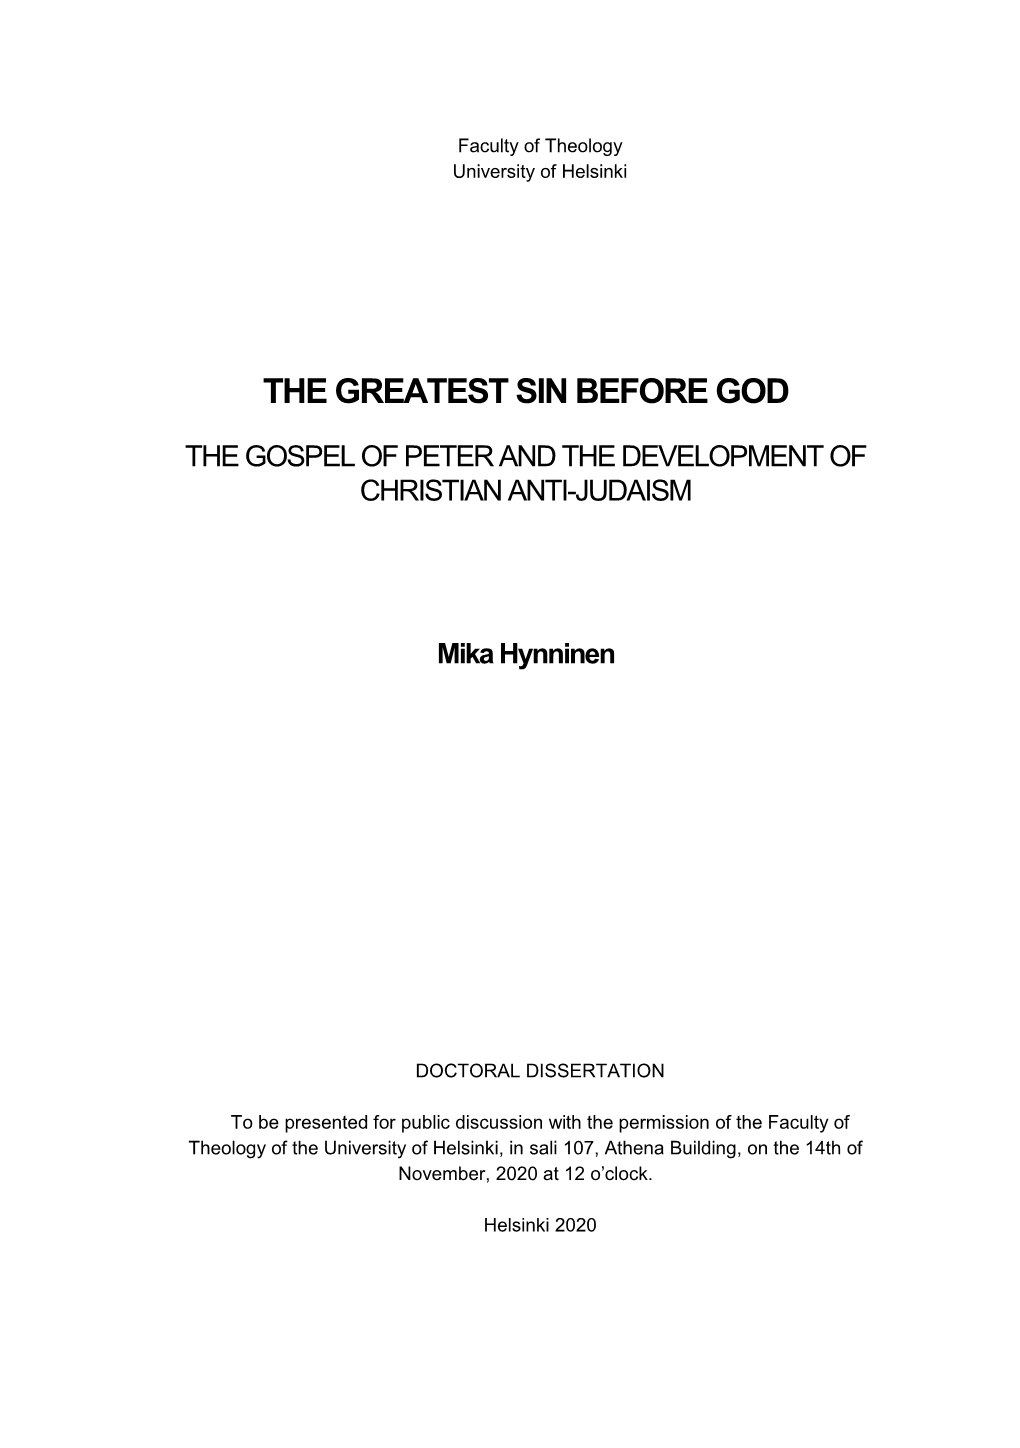 The Greatest Sin Before God the Gospel of Peter and The